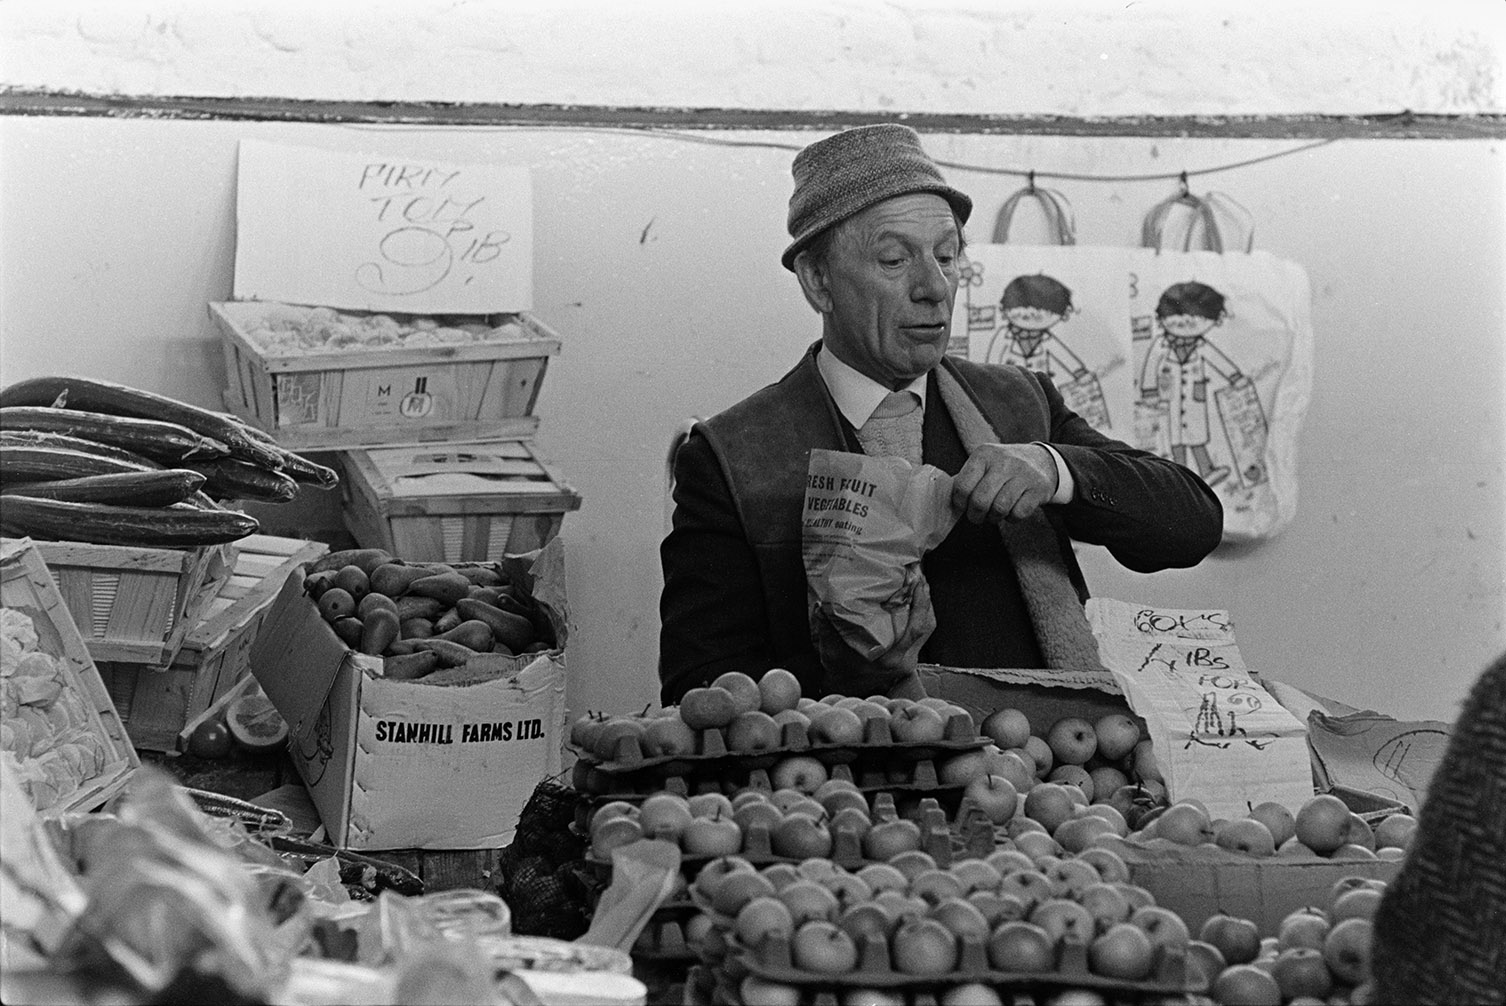 A man running a fruit and vegetable stall at Barnstaple Pannier Market. He is bagging up apples. Cucumbers and pears can also be seen on the stall.